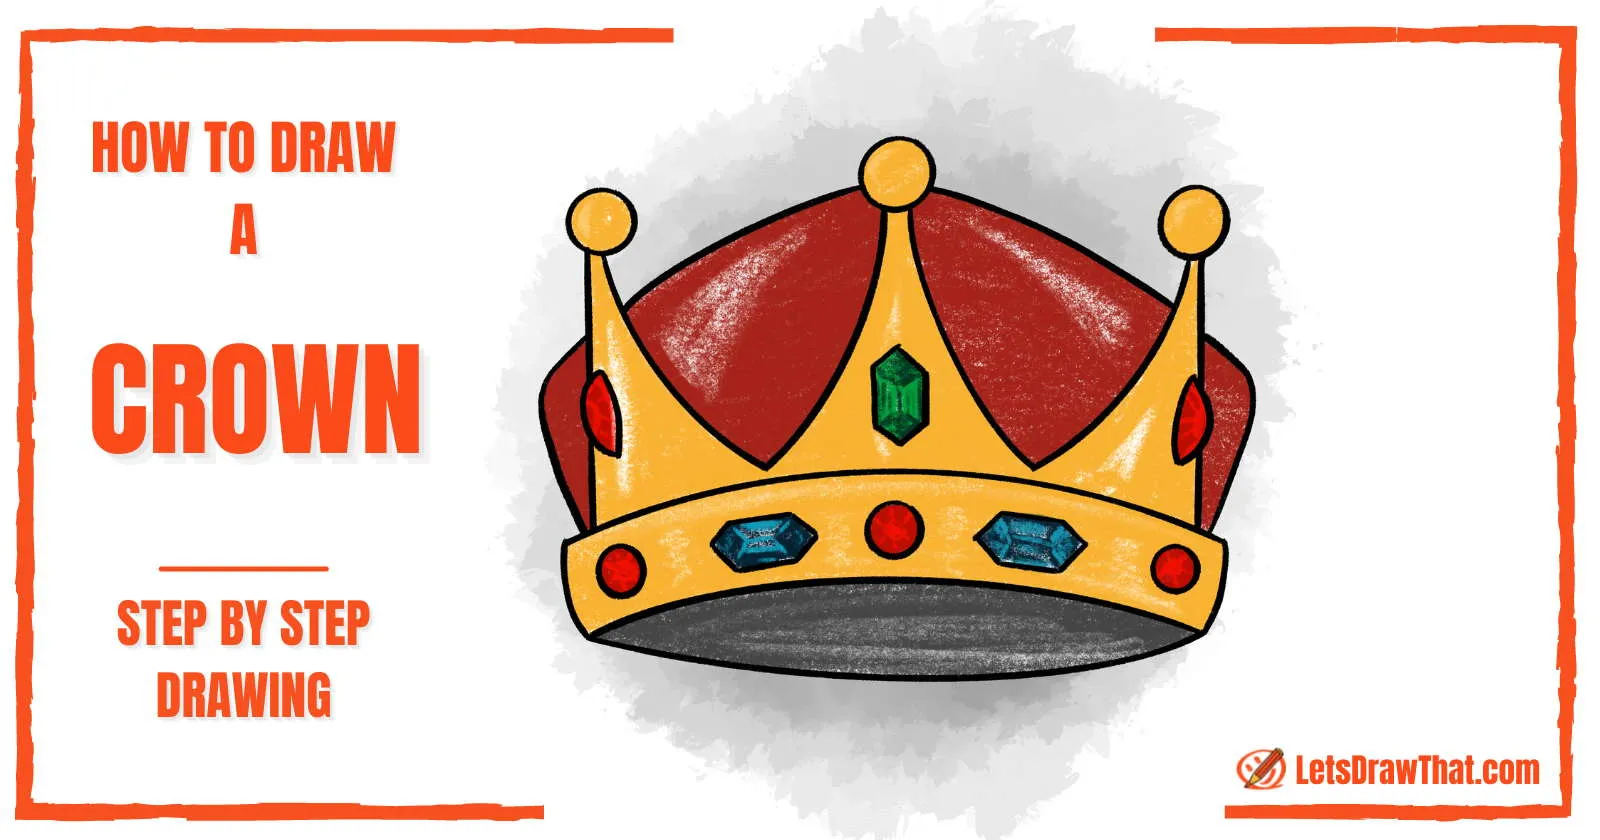 How To Draw a Crown – An Easy Crown Drawing Step-by-Step